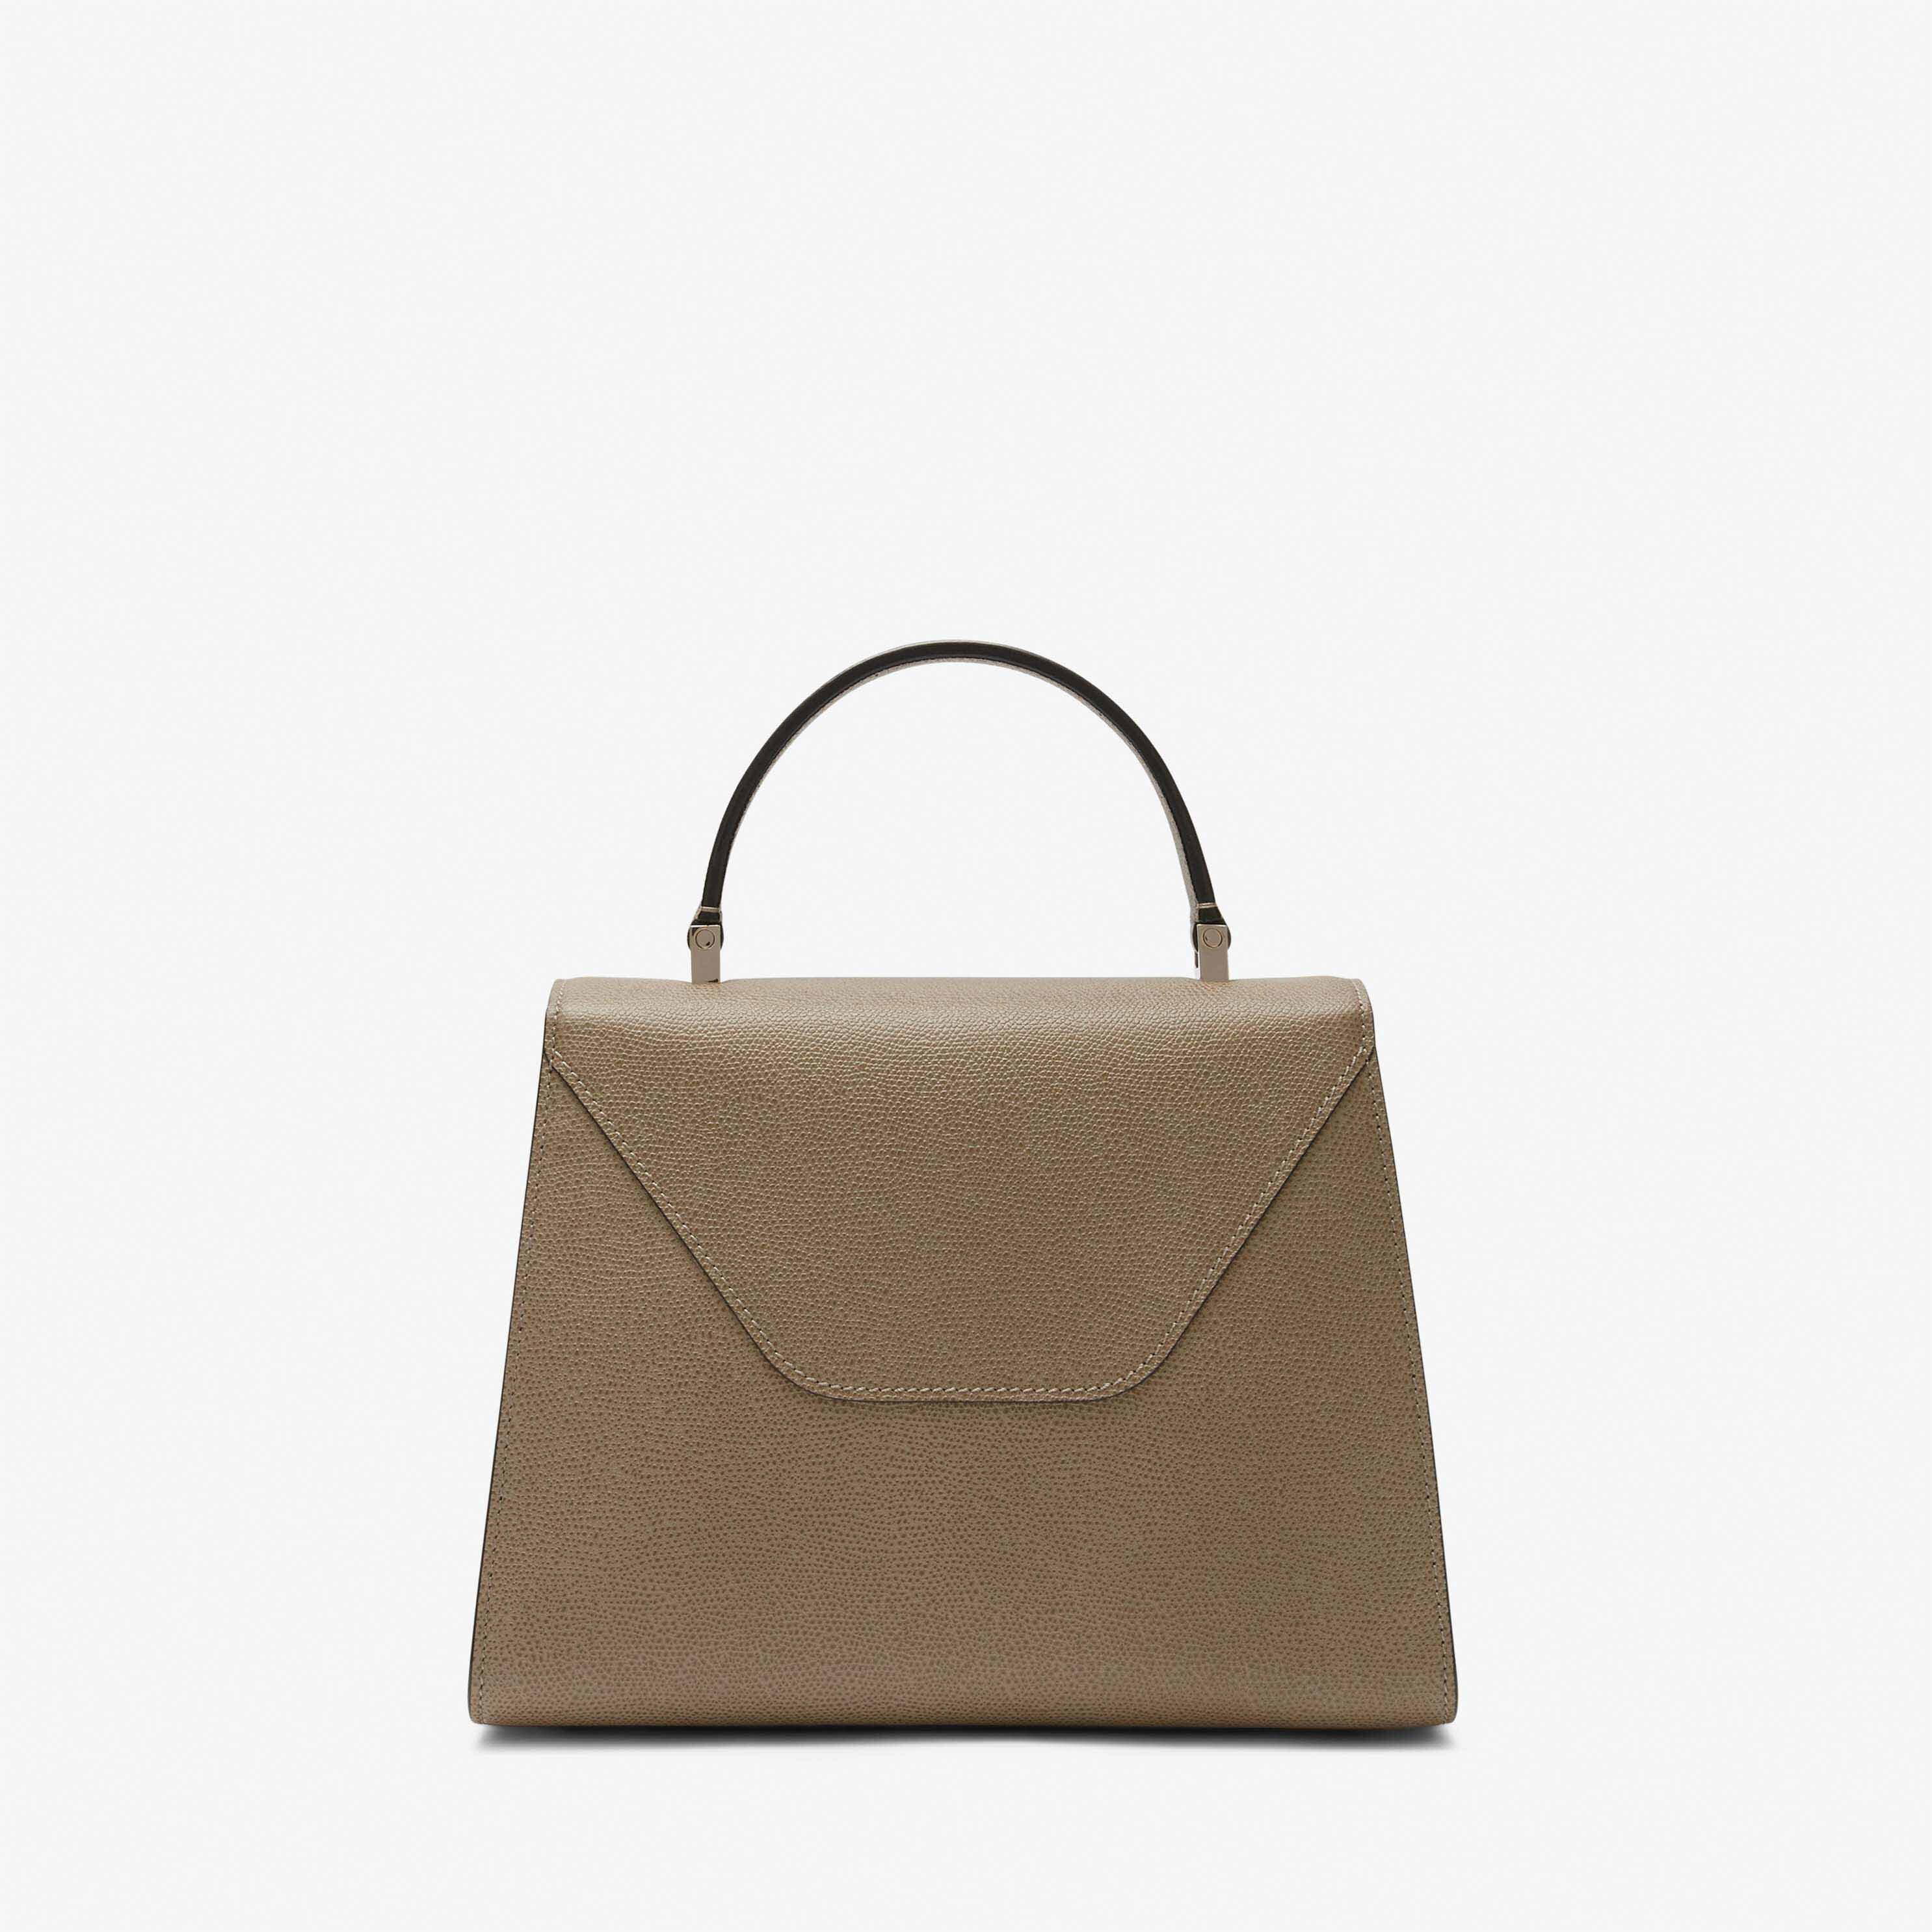 Oyster Brown Leather Medium top handle bag | Valextra Iside